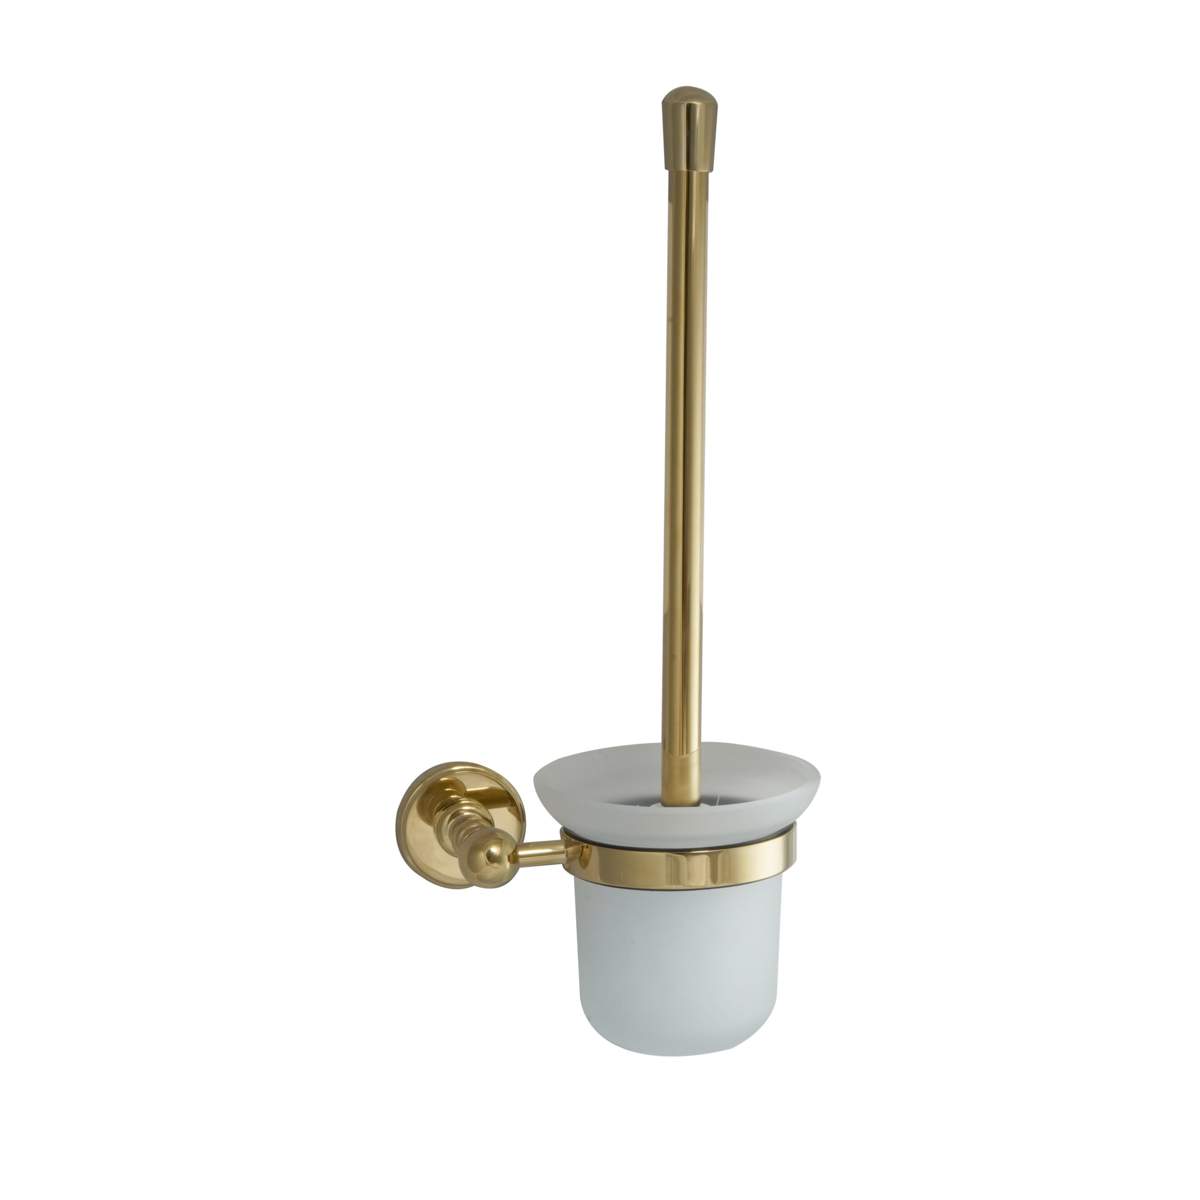 JTP Grosvenor Cross Antique Brass Edition Wall Mounted Toilet Brush Frosted Glass (GR165G)